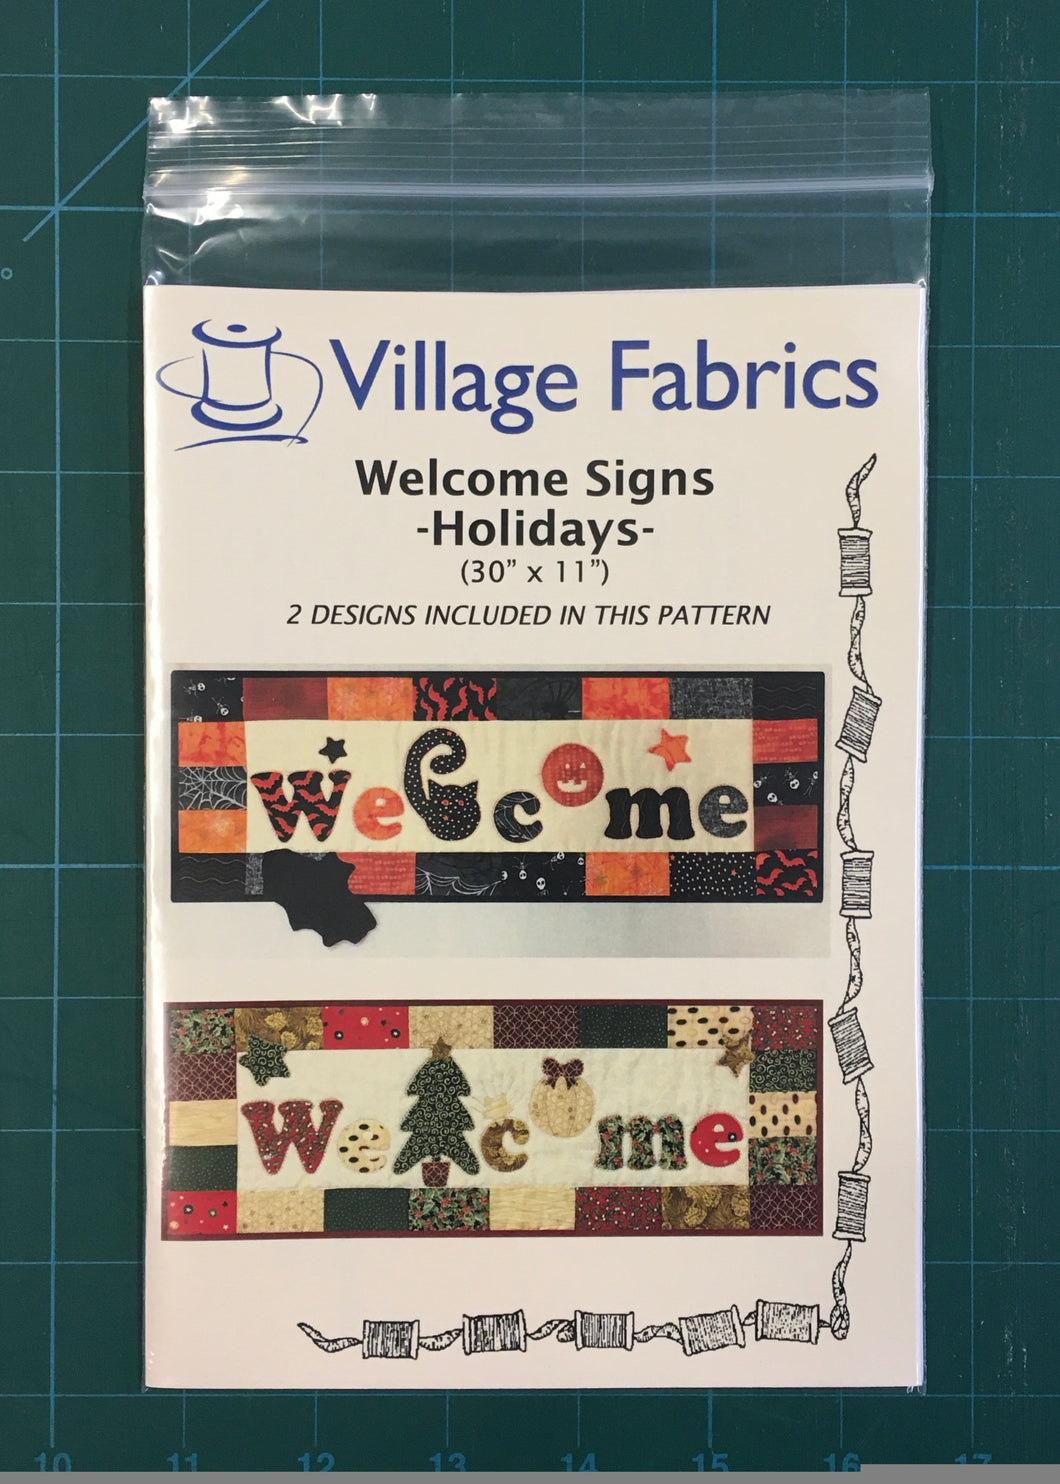 Welcome Signs - Holidays Pattern